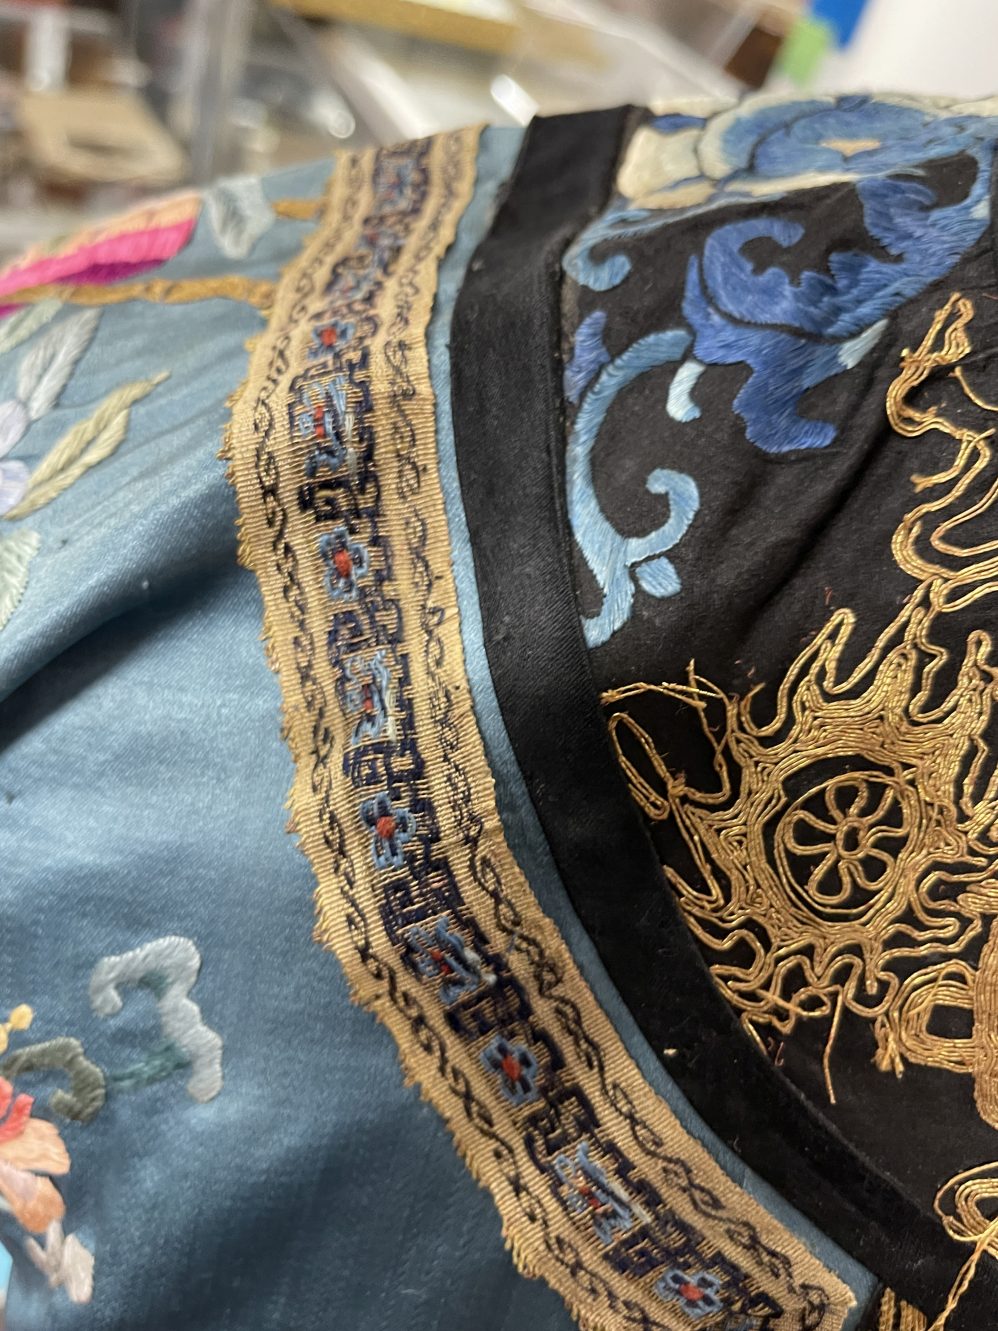 19th cent. Embroidered silk robe decorated with floral sprays and baskets of flowers on a light blue - Image 6 of 7